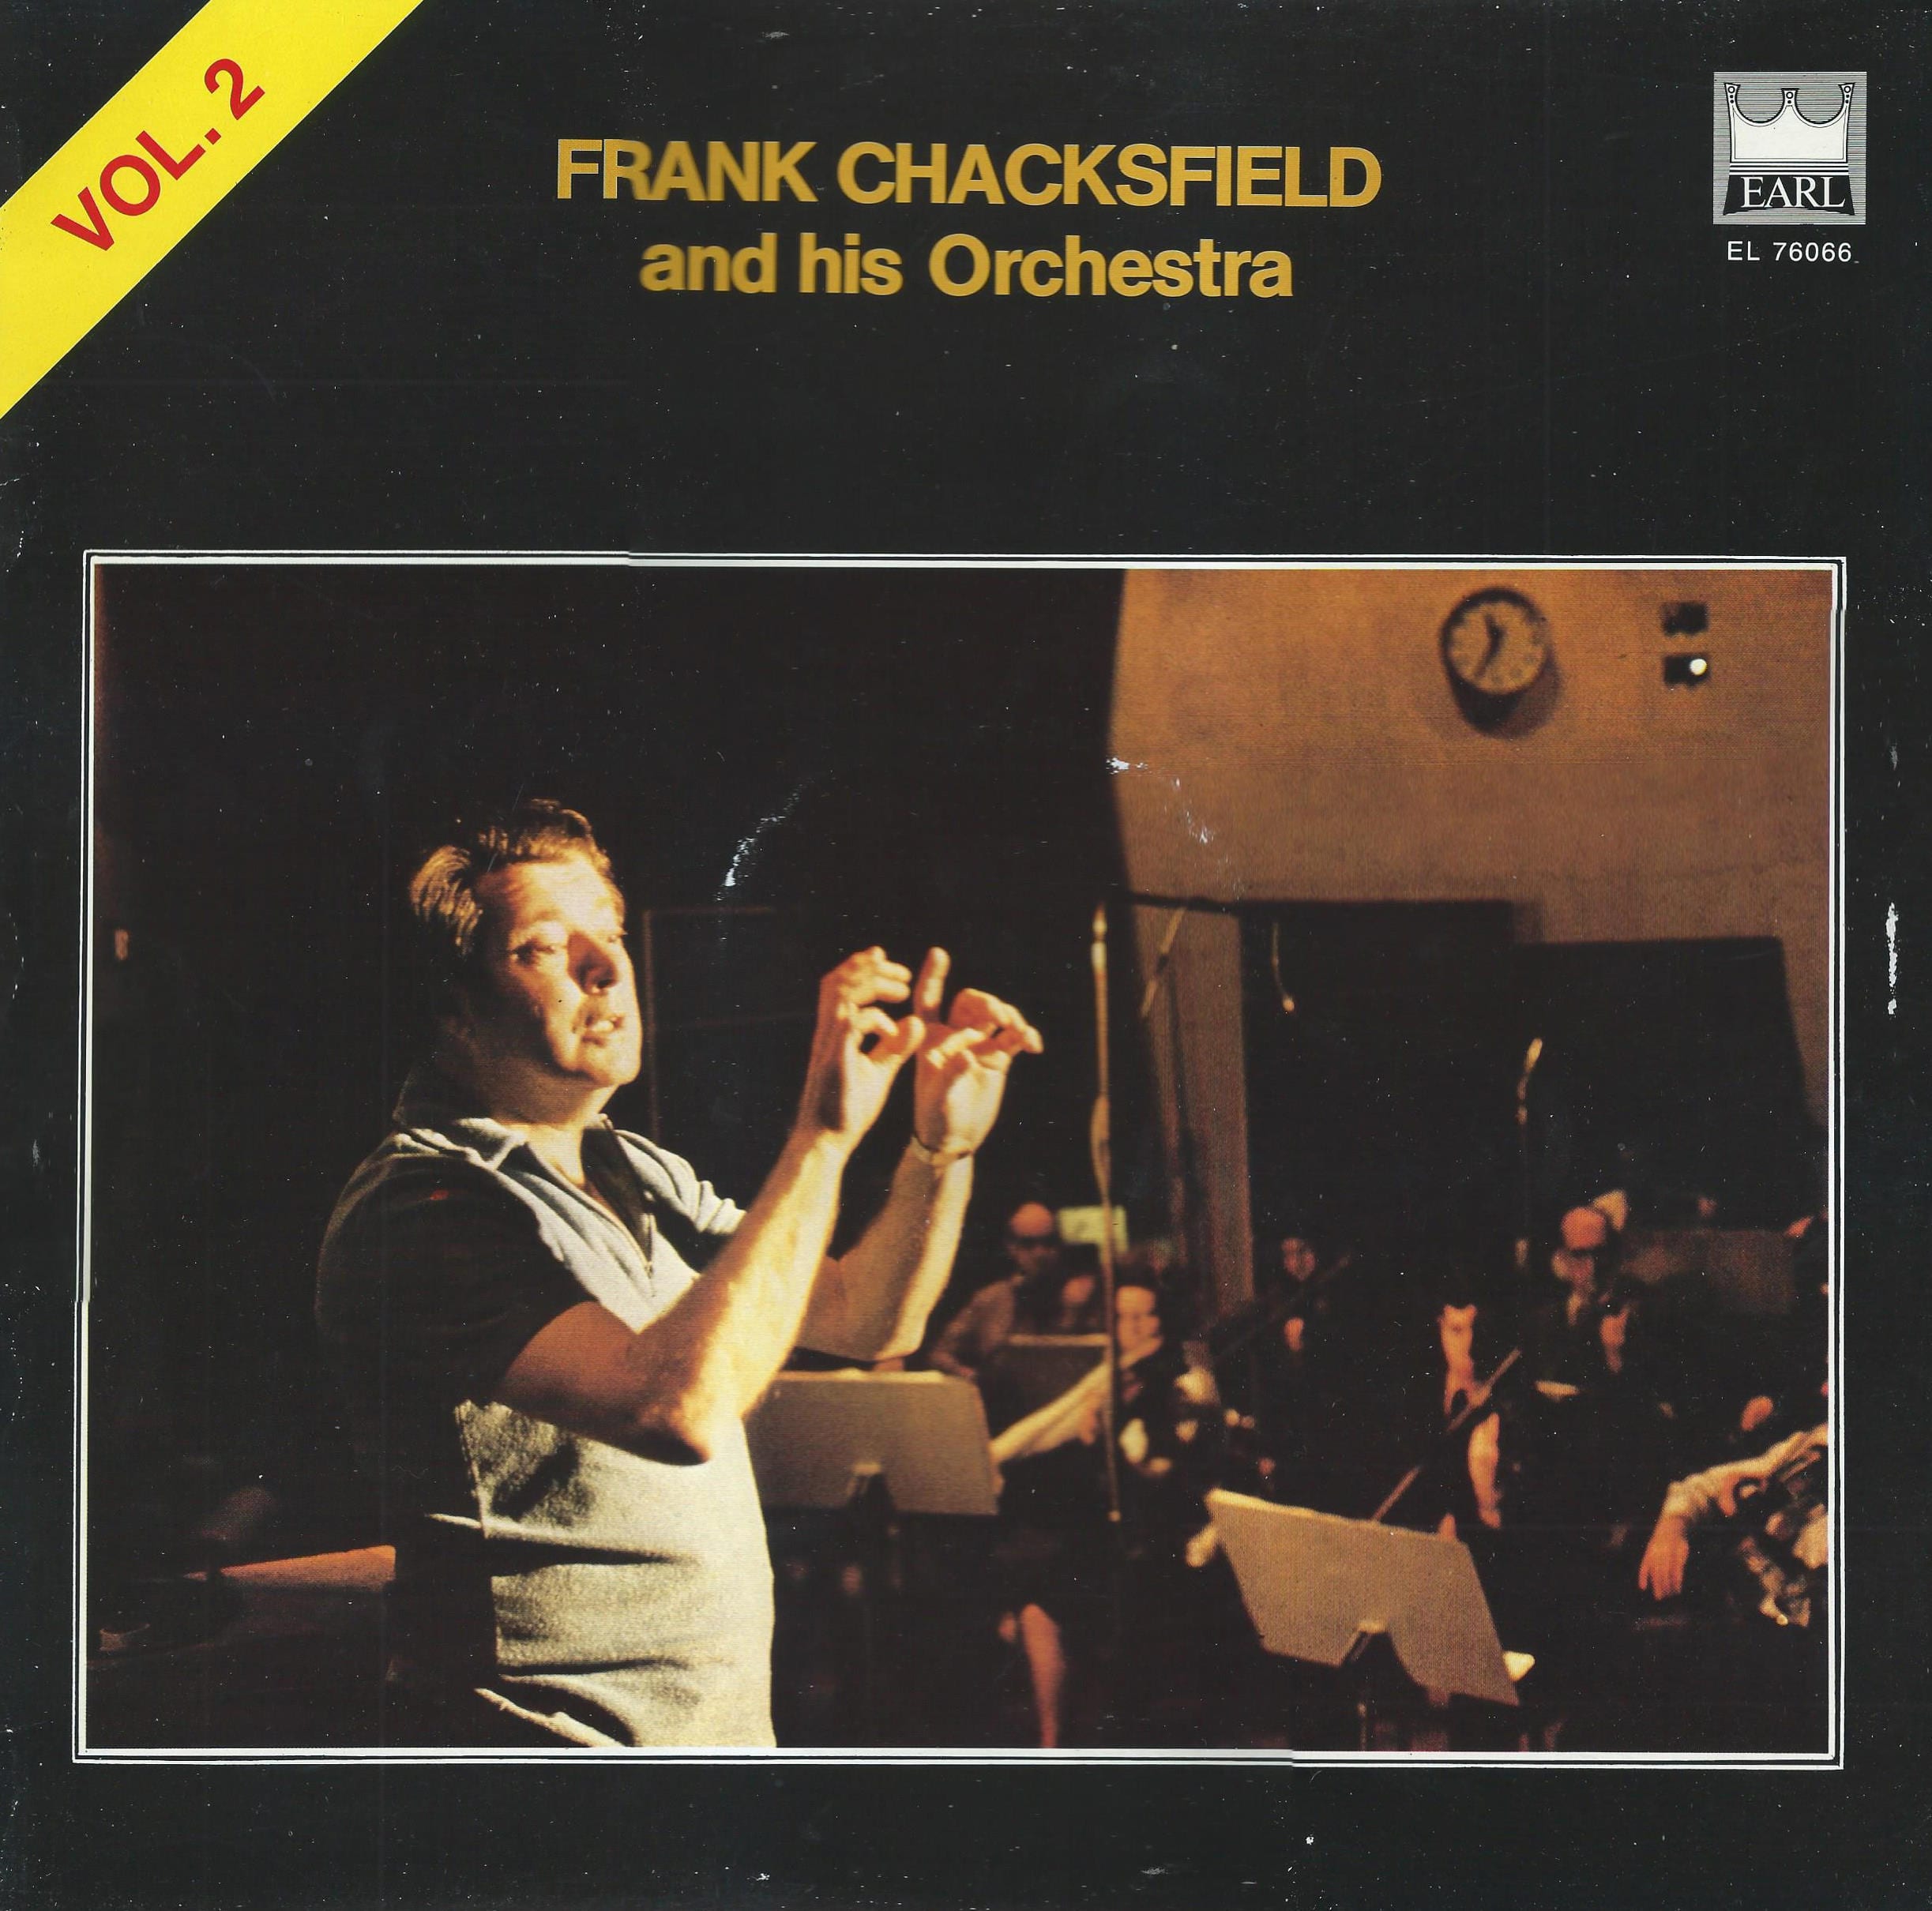 Frank Chacksfield and his Orchestra, Vol. 2 – 1